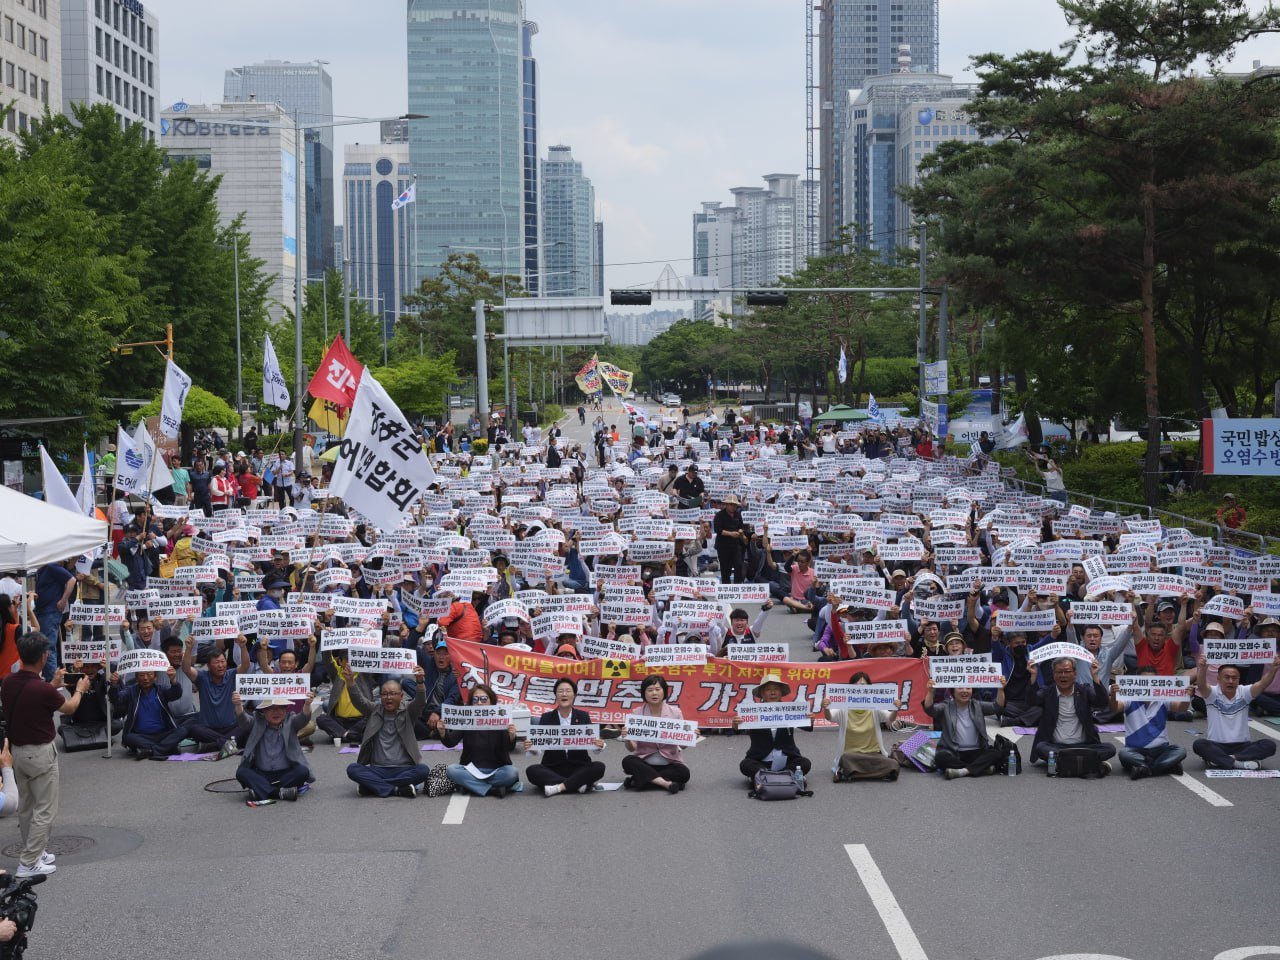 This photo shows fishermen at a demonstration to protest Seoul's failure to oppose Japan's plan to dump wastewater at sea on June 12 near the National Assembly. (Courtesy of Civil Society Organizations Network in Korea)